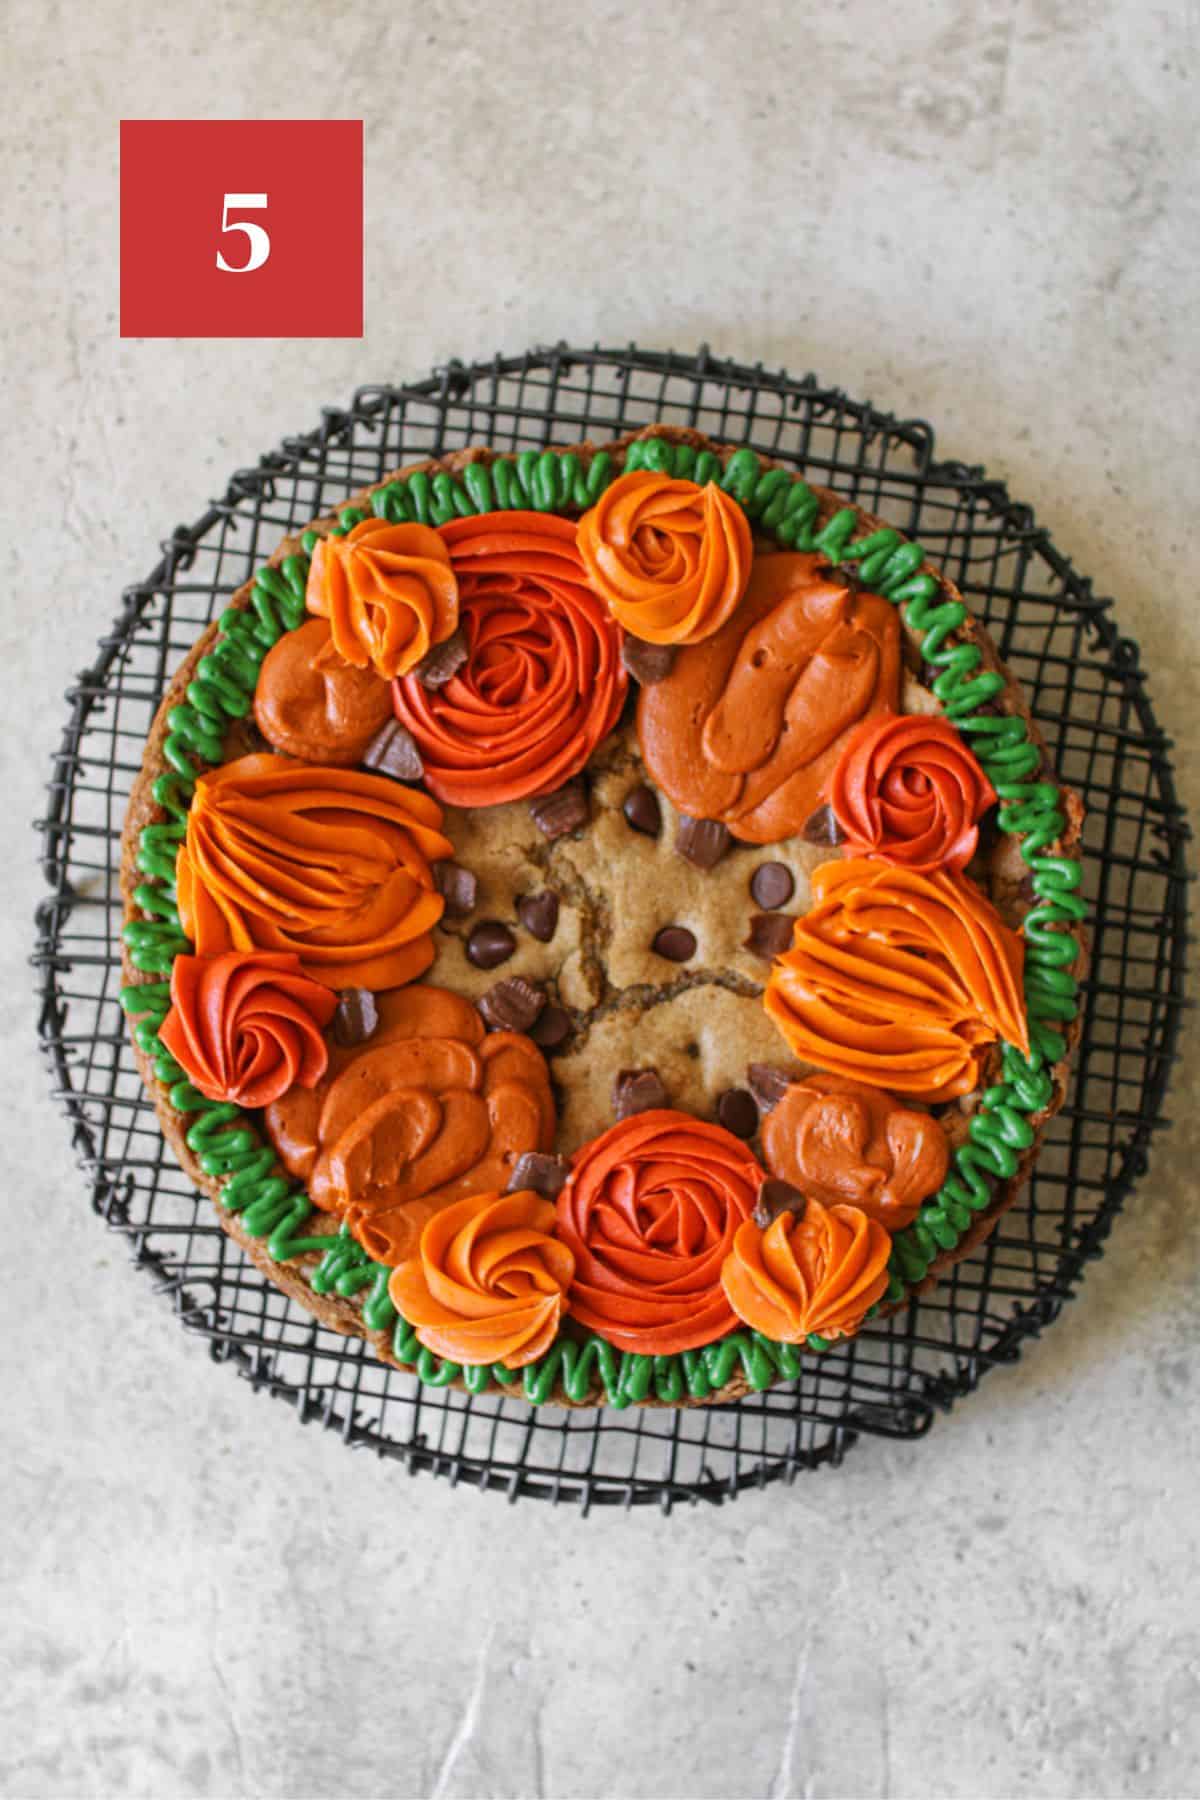 Fall cookie cake with a thin green wavy border and different shades and sizes of orange pumpkins around the edge of the cookie cake. the pumpkins have a small brown stem. The cookie cake sits on a black wire trivet on a stone background. In the upper left corner is a dark red square with a white '5' in the center.